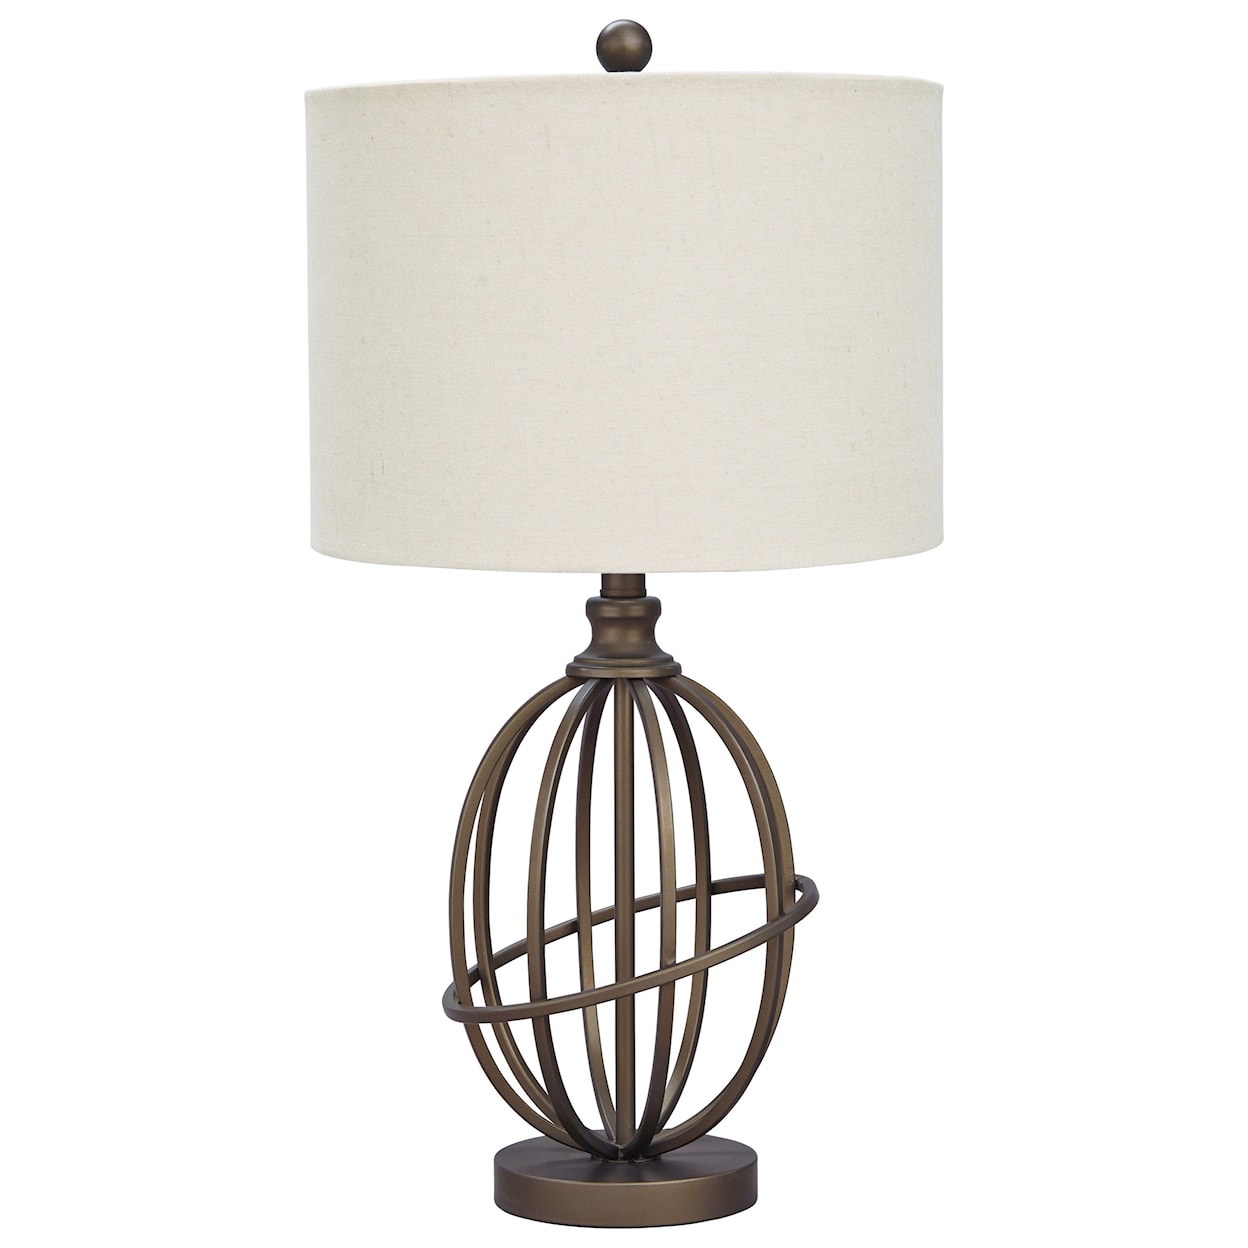 Benchcraft Lamps - Vintage Style Manase Bronze Finish Metal Table Lamp